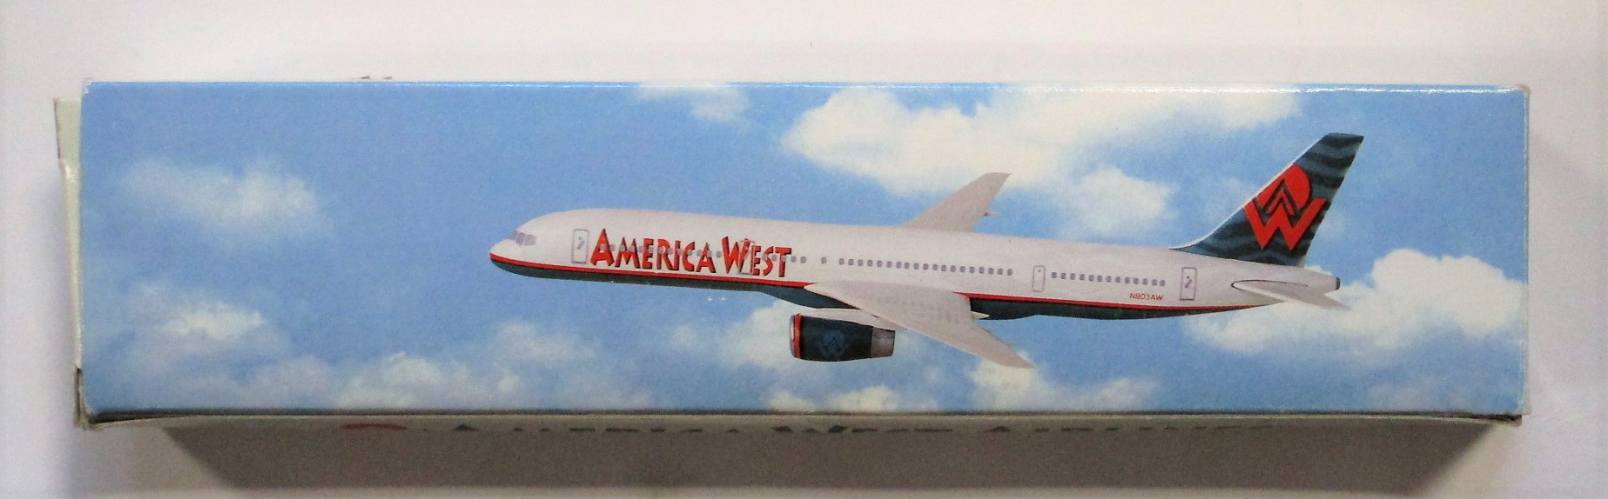 AIRLINER COLLECTIBLE  1/200 AMERICA WEST AIRLINES BOEING 757-200